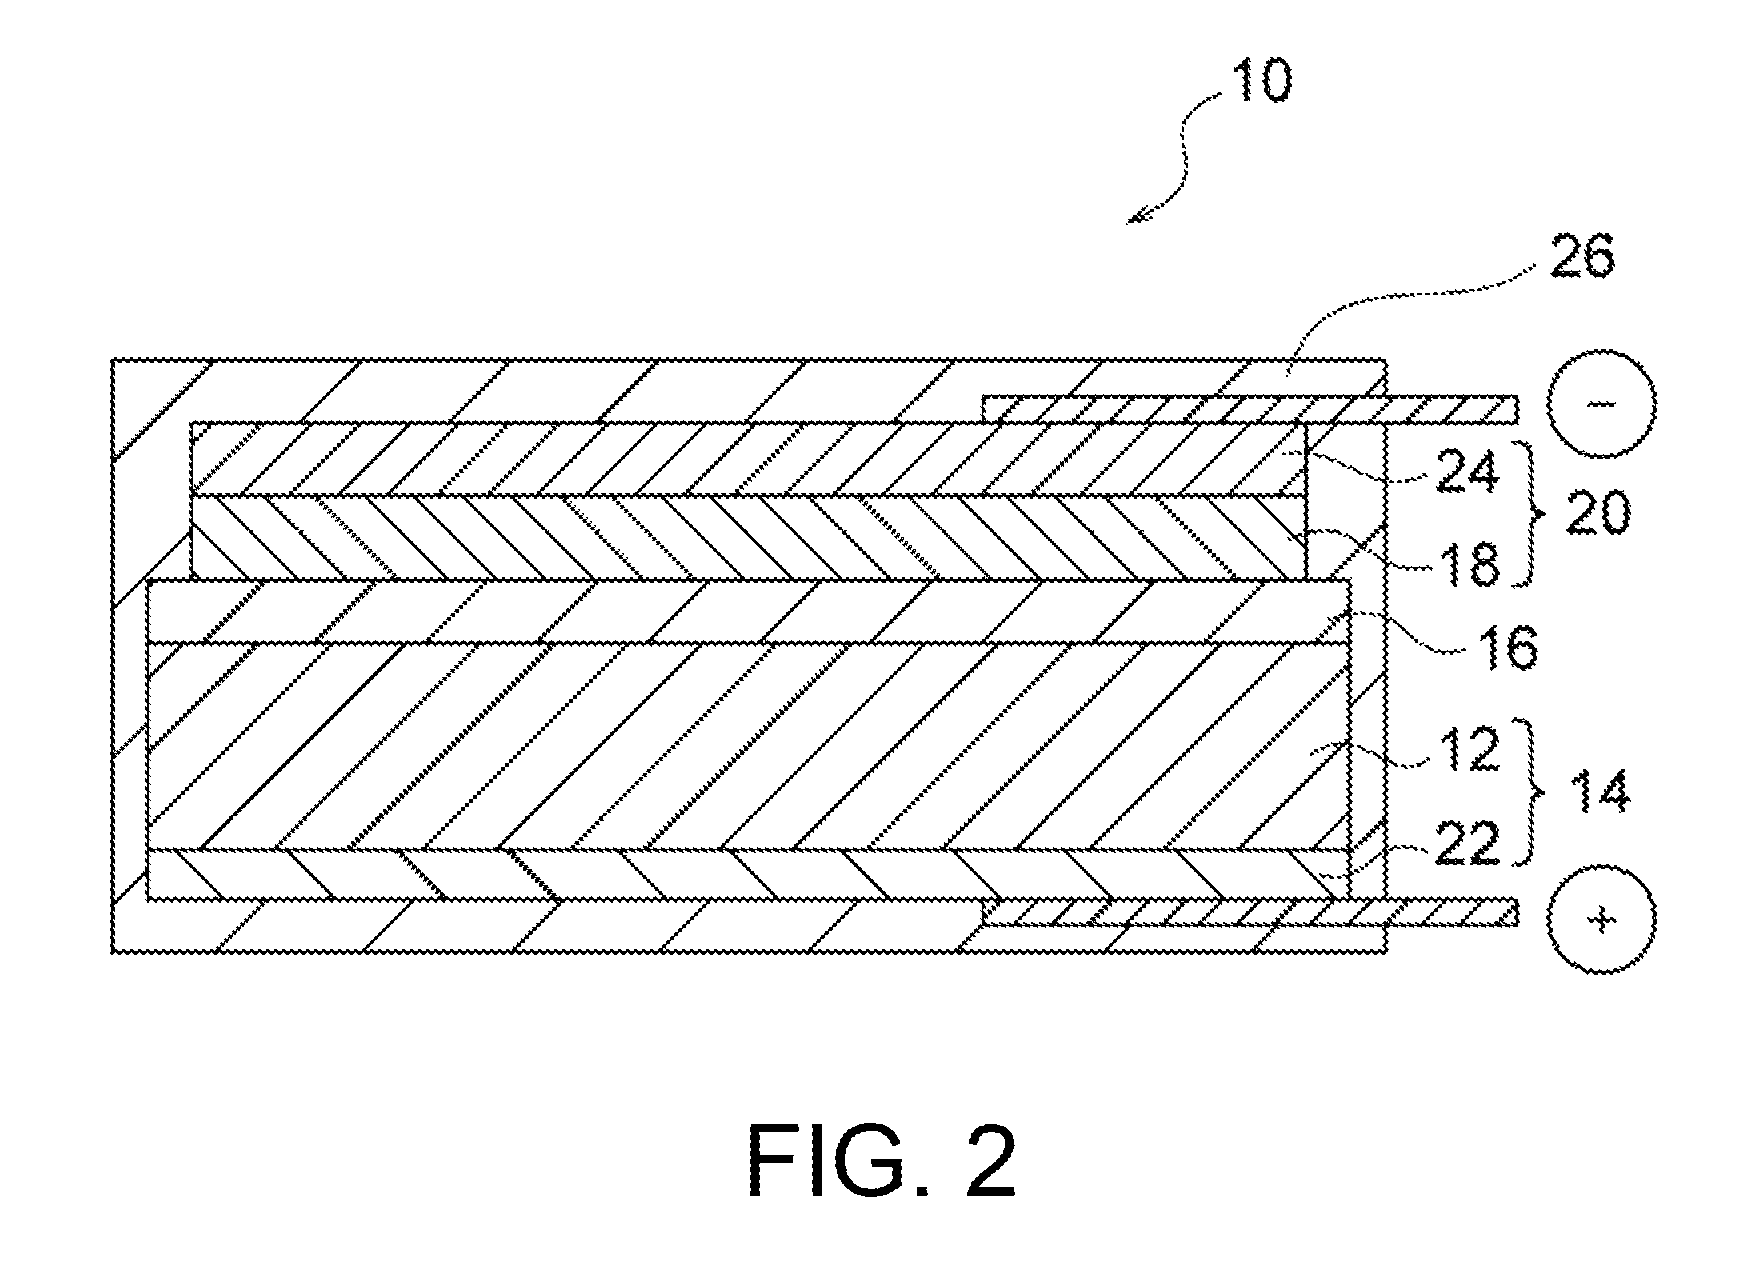 Volatile memory backup system including all-solid-state battery